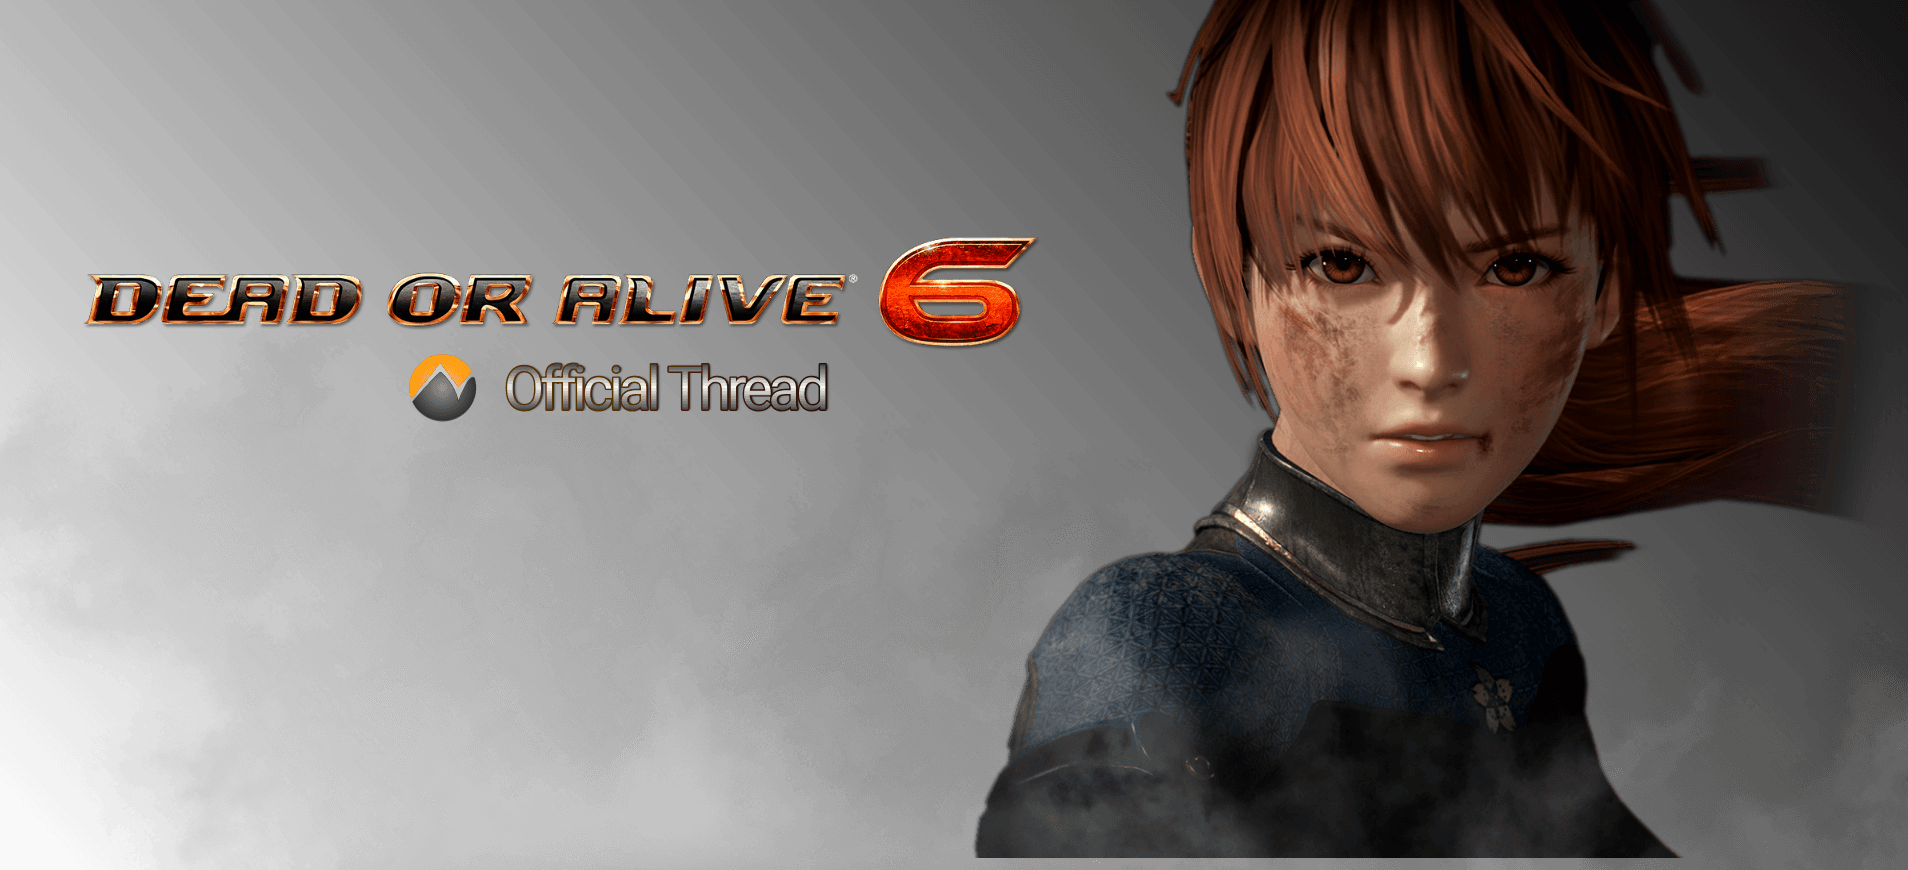 Dead or Alive 6 Update Version 2.26 Patch Notes 1.10 released For PS4 Xbox One PC Full Details Here